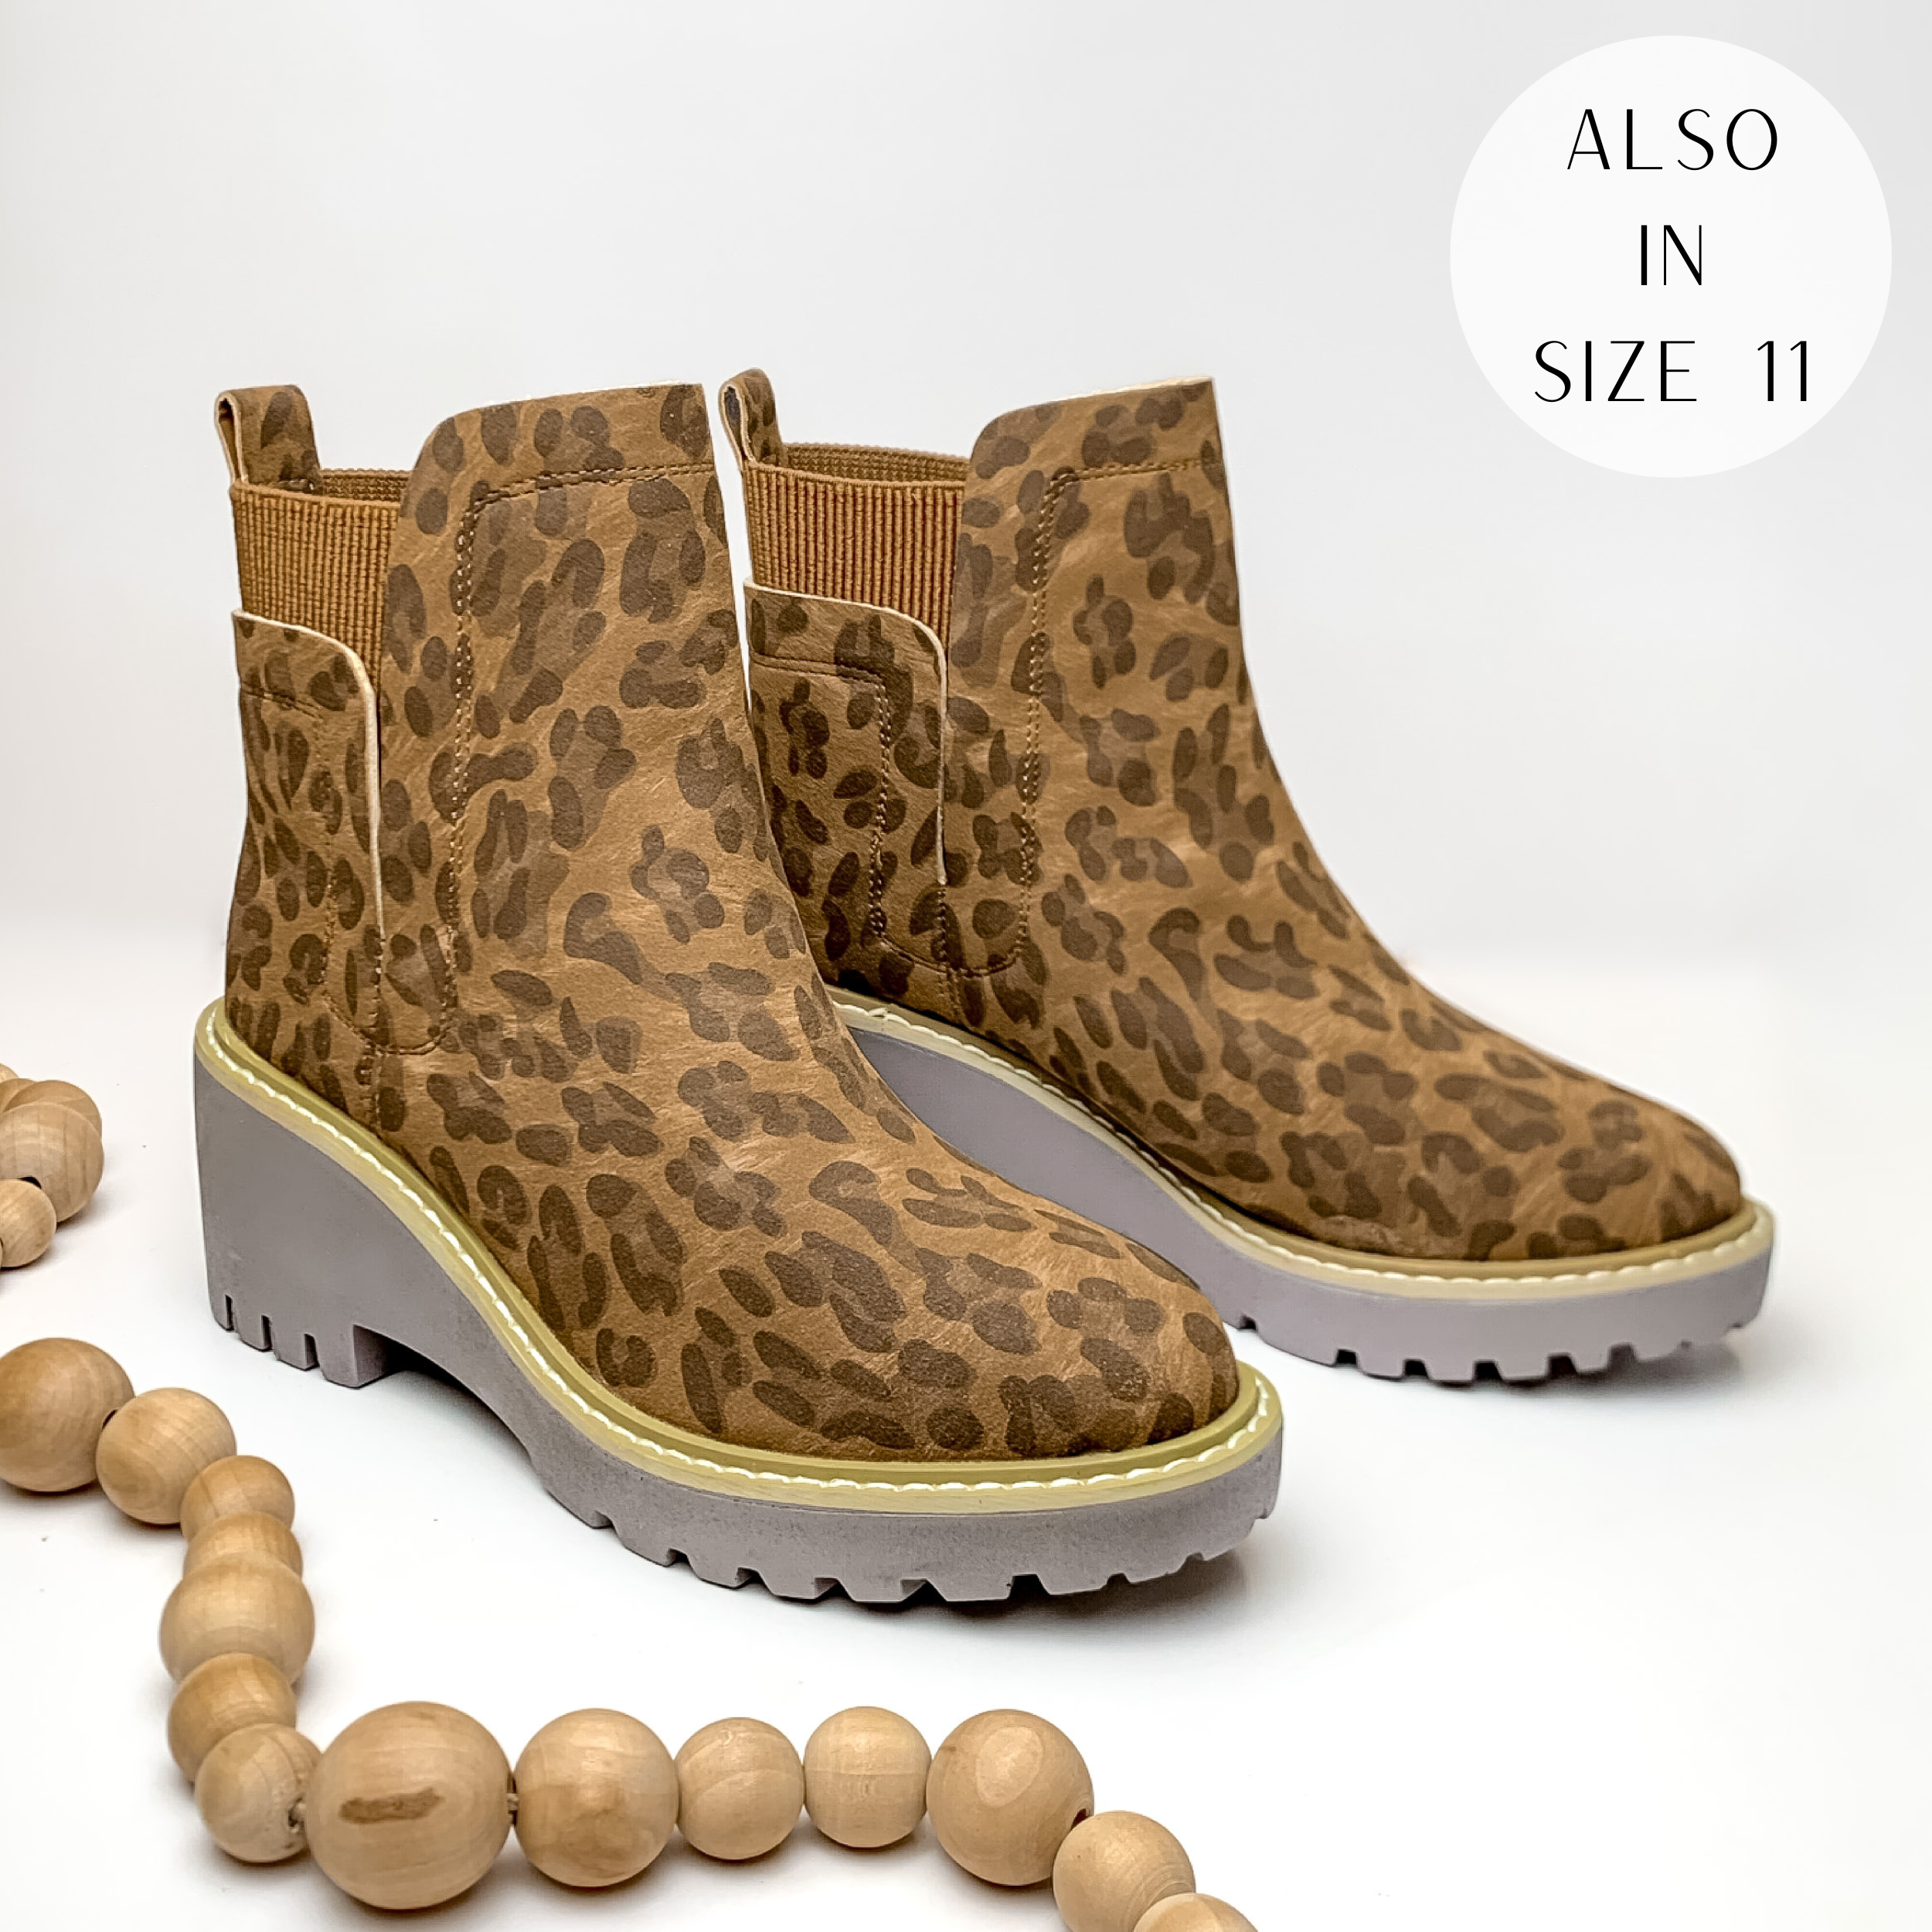 Leopard print pull on booties with chunky heel. Pictured on white background with light tan beads.